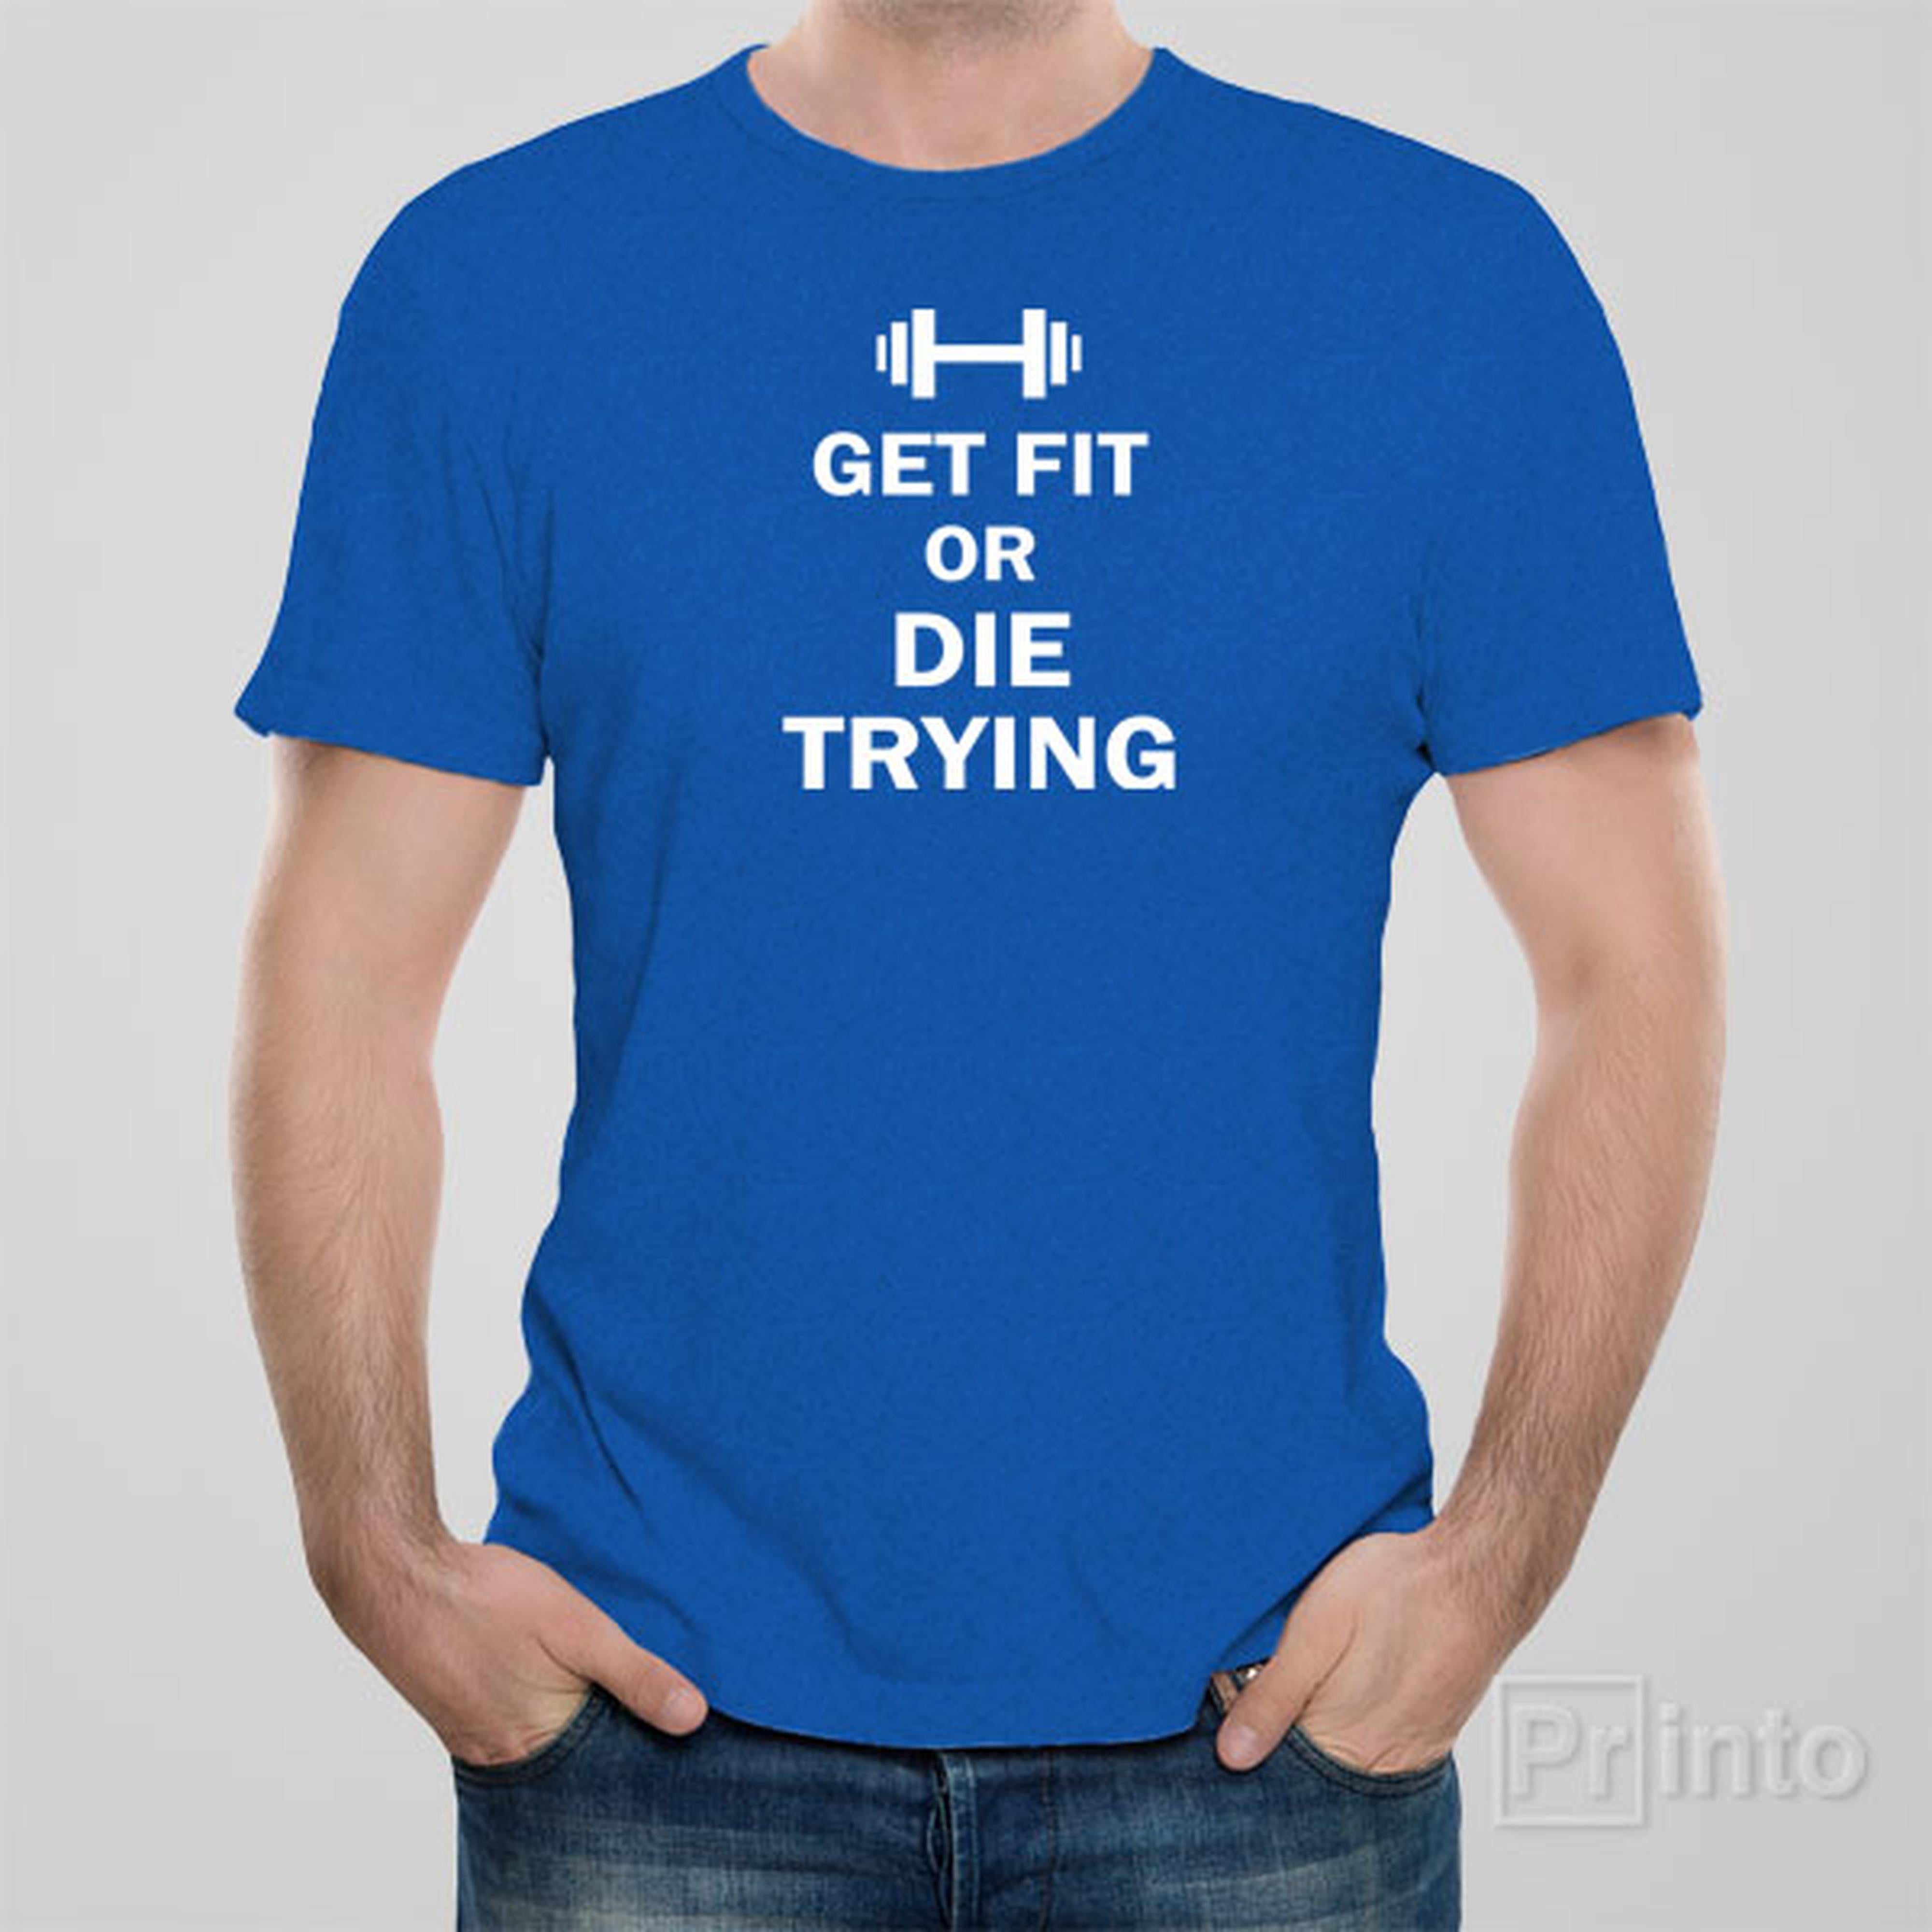 get-fit-or-die-trying-t-shirt